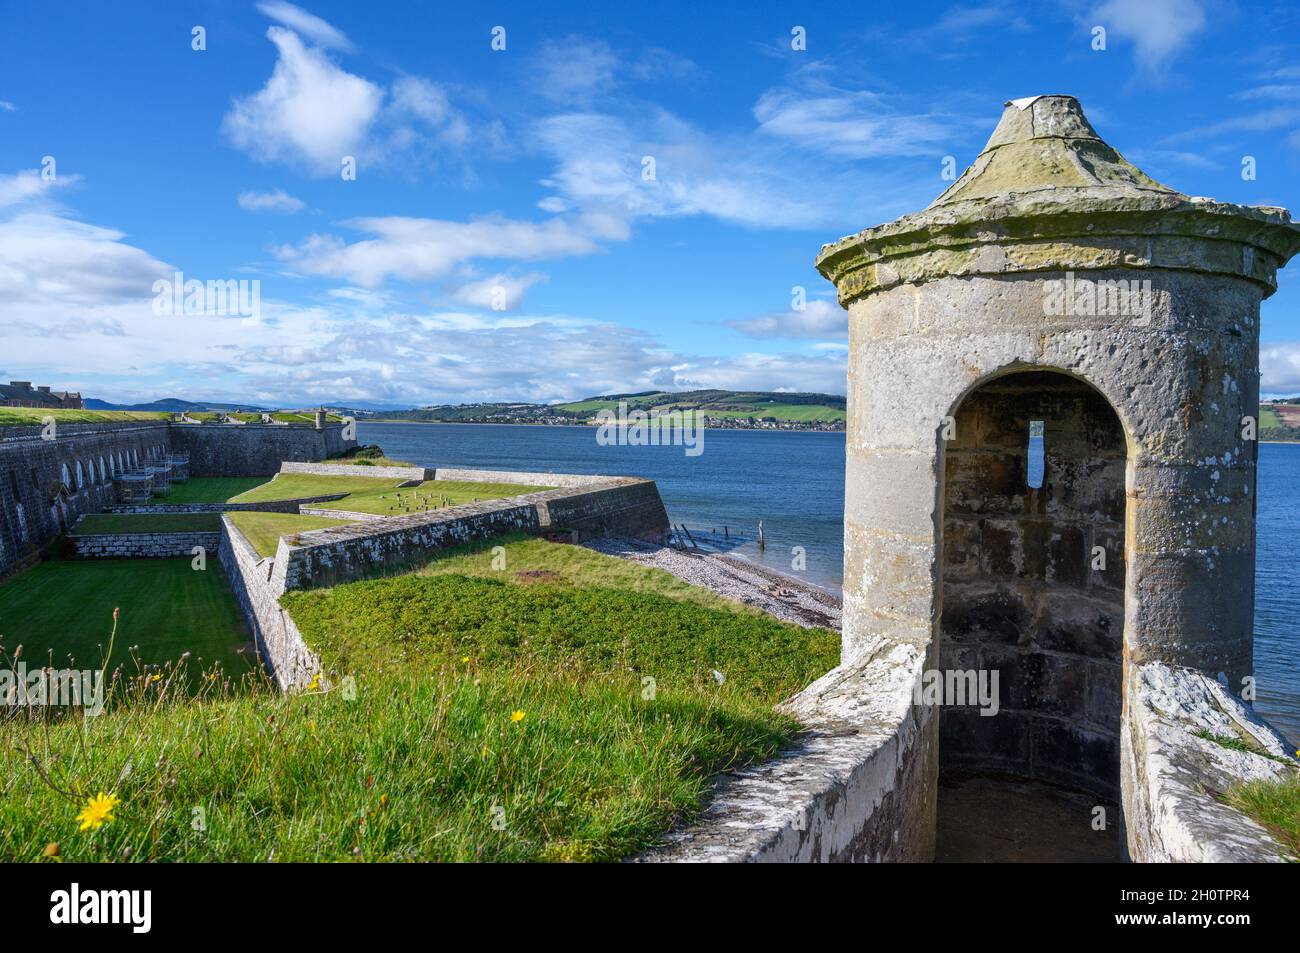 View from the battlements at Fort George looking over the Moray Firth, near Inverness, Scotland, UK Stock Photo